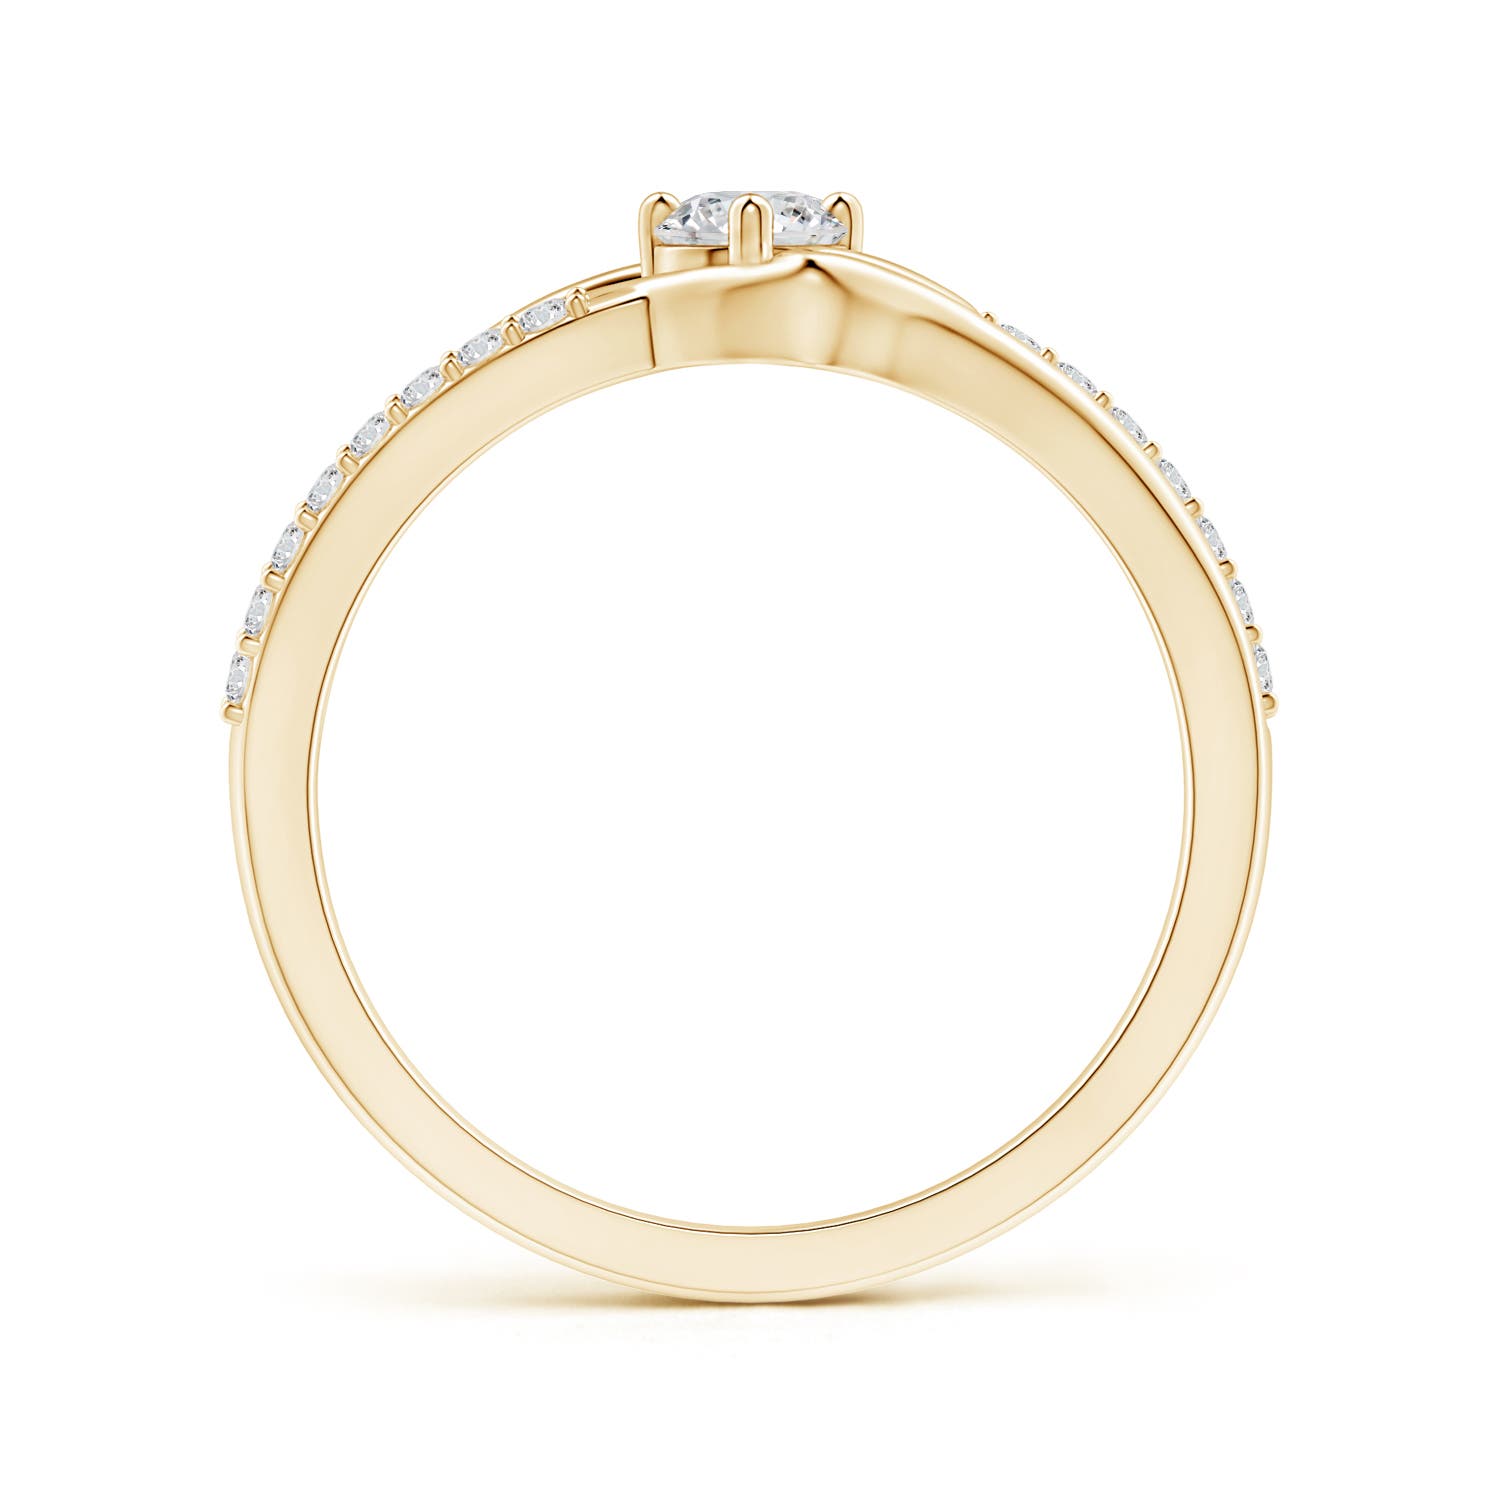 H, SI2 / 0.35 CT / 14 KT Yellow Gold